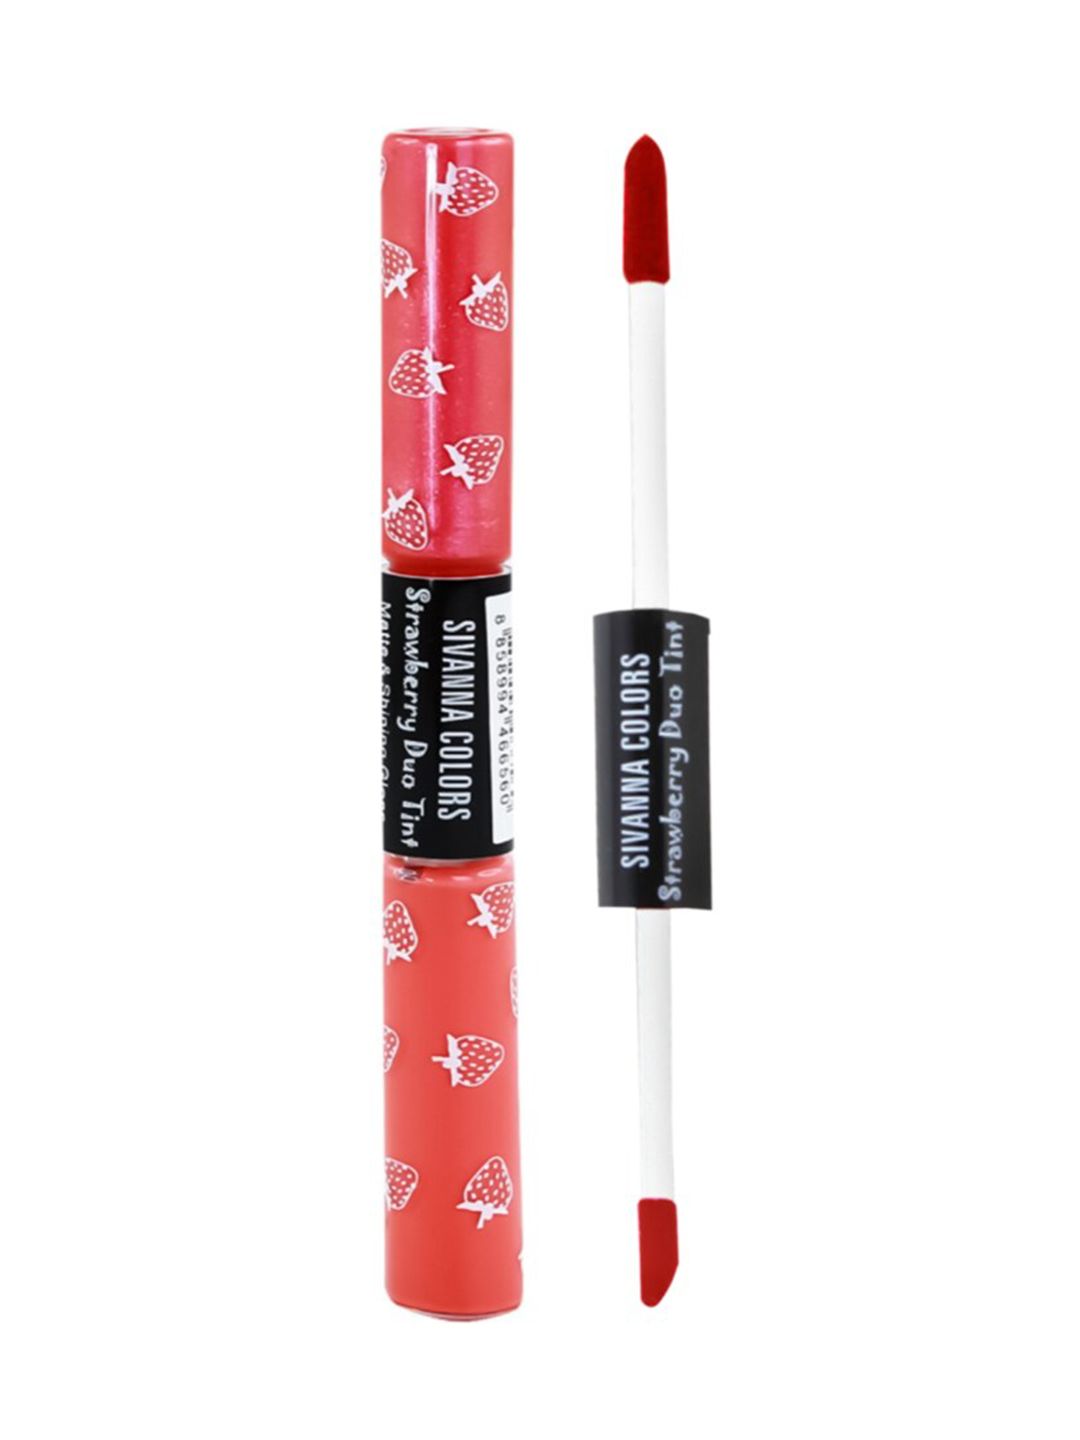 Sivanna Colors 2 in 1 Strawberry Duo Tint Matte & Shining Lip Gloss - DK035 02 Price in India